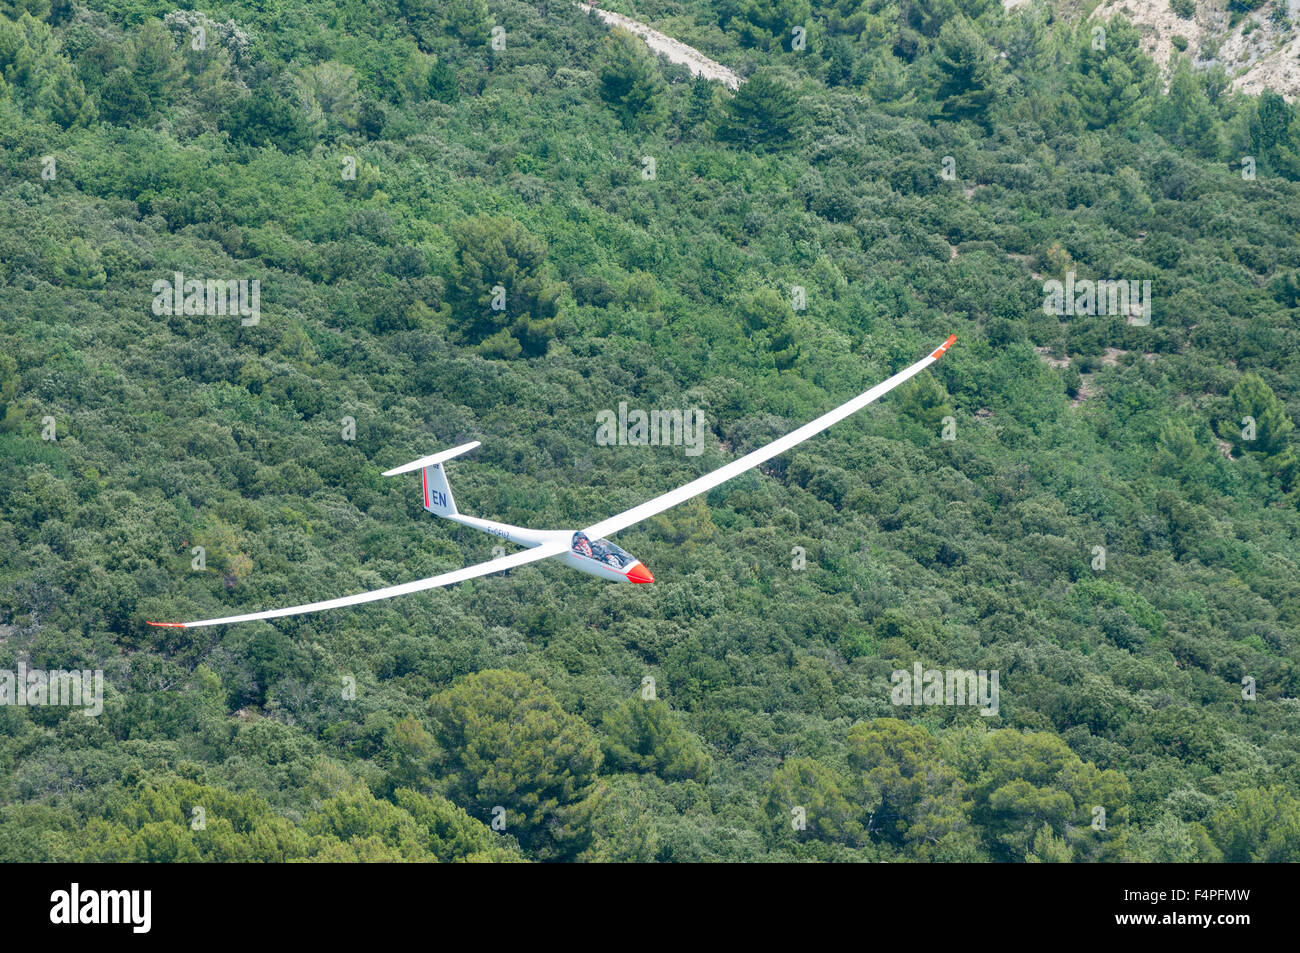 Aerial air to aor image of glider in flight Stock Photo